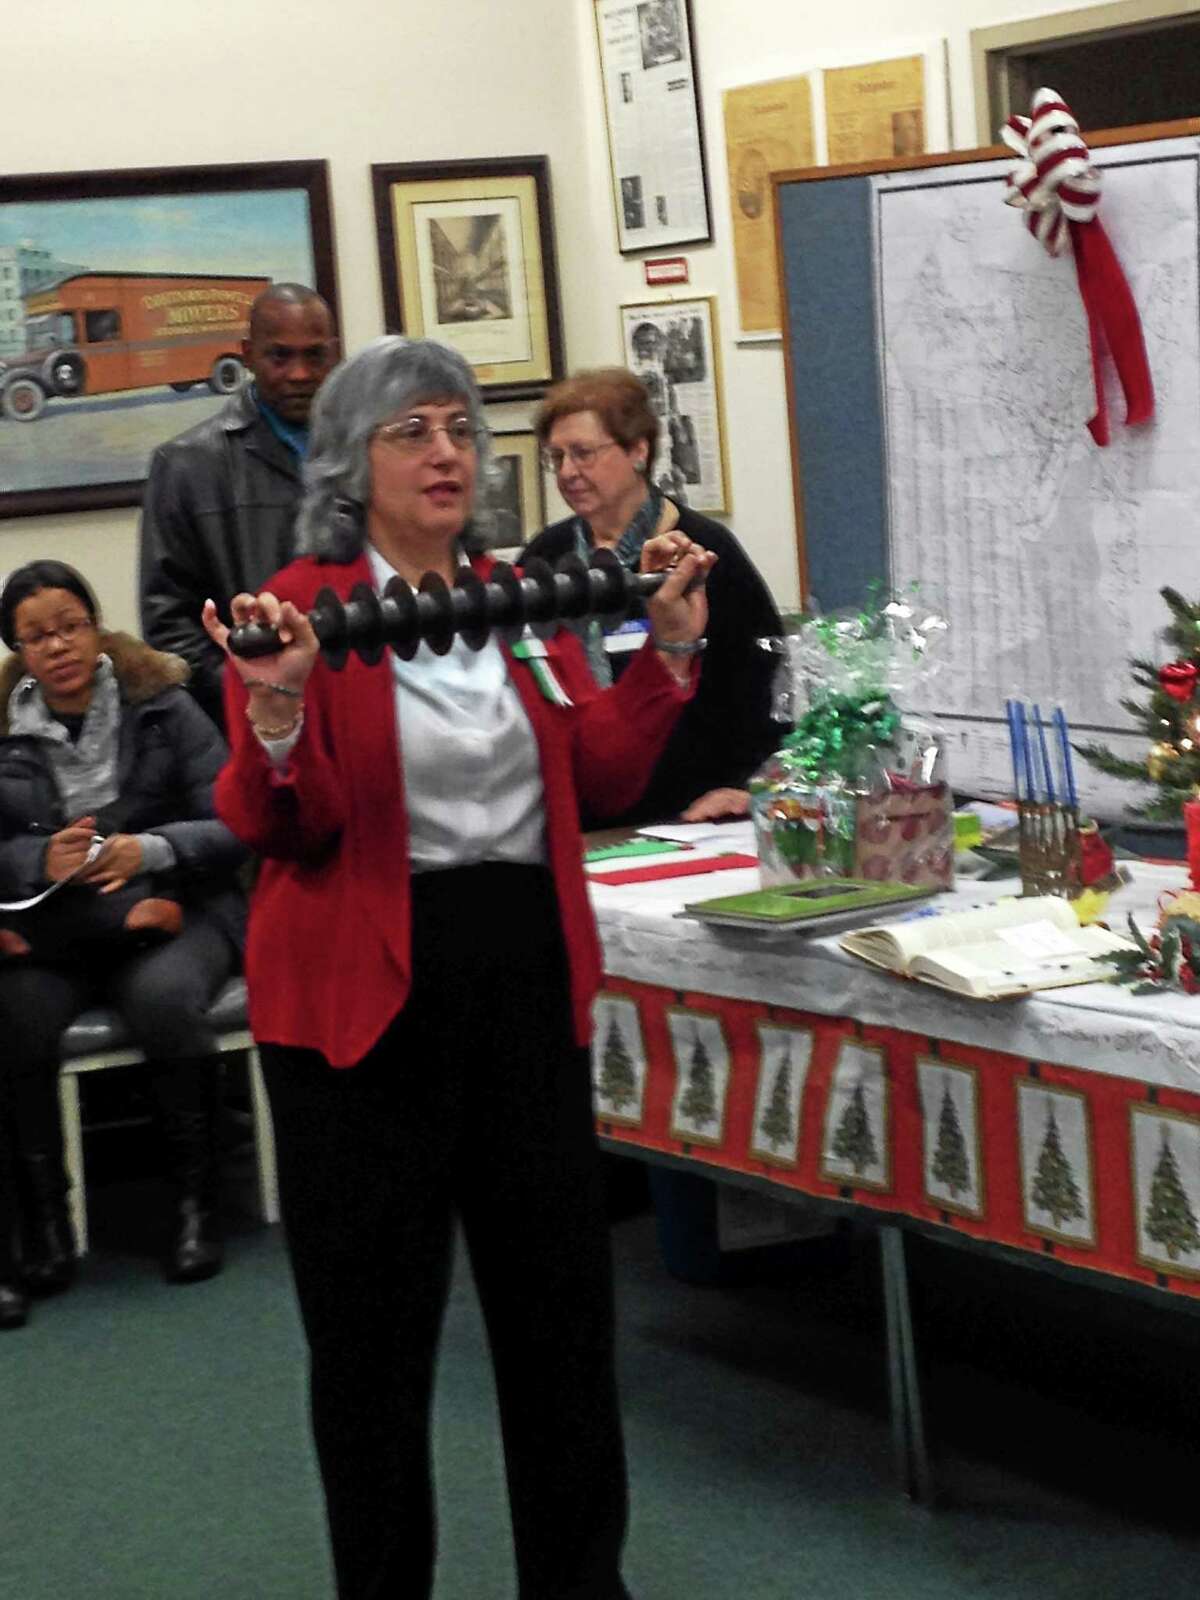 Laura Parisi, president if the Italian American Heritage Society, shows a cutter from a local bakery used to make traditional sweet candy. Parisi spoke about Italian holiday traditions Sunday at New Haven’s Ethnic Heritage Center.